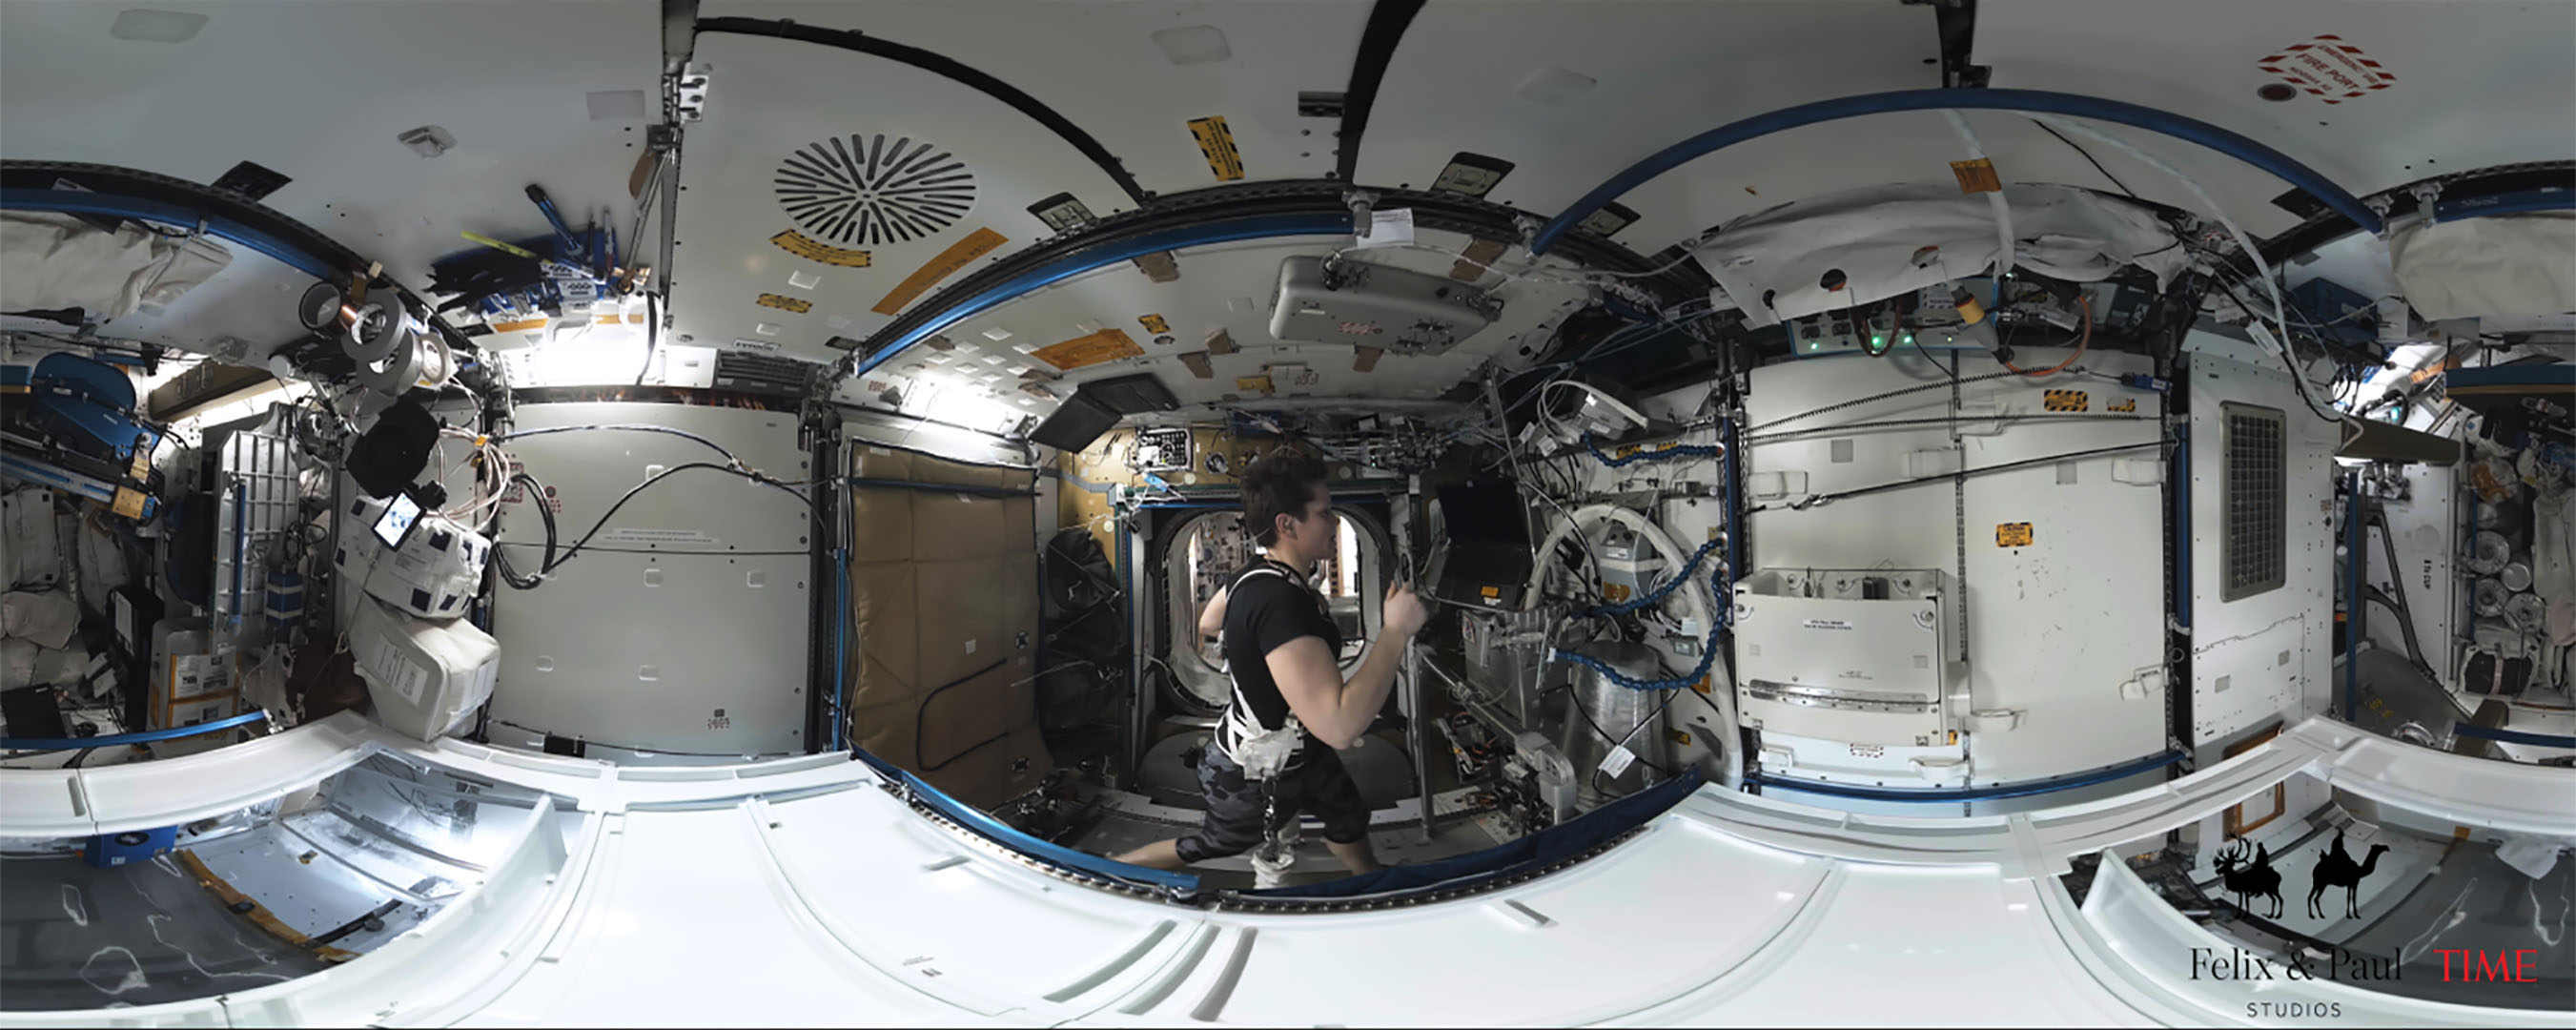 Space Station in 360 VR